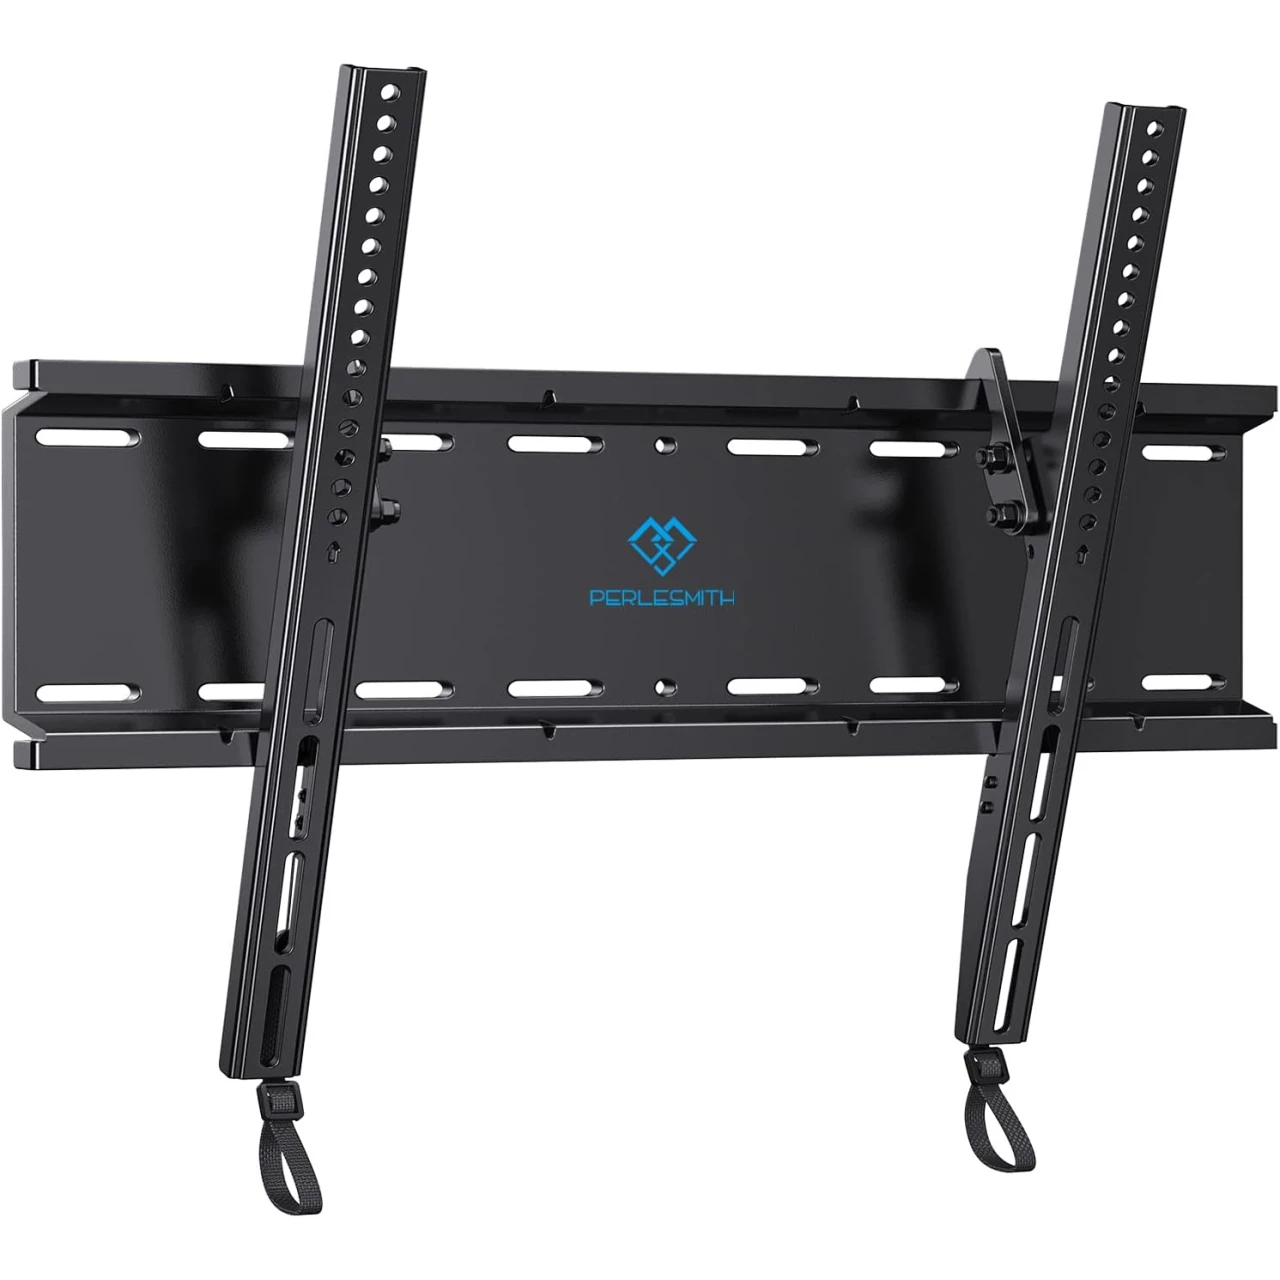 PERLESMITH Tilting TV Wall Mount Bracket Low Profile for Most 23-60 inch LED LCD OLED, Plasma Flat Screen TVs with VESA 400x400mm Weight up to 115lbs, Fits 16&quot; Wood Stud